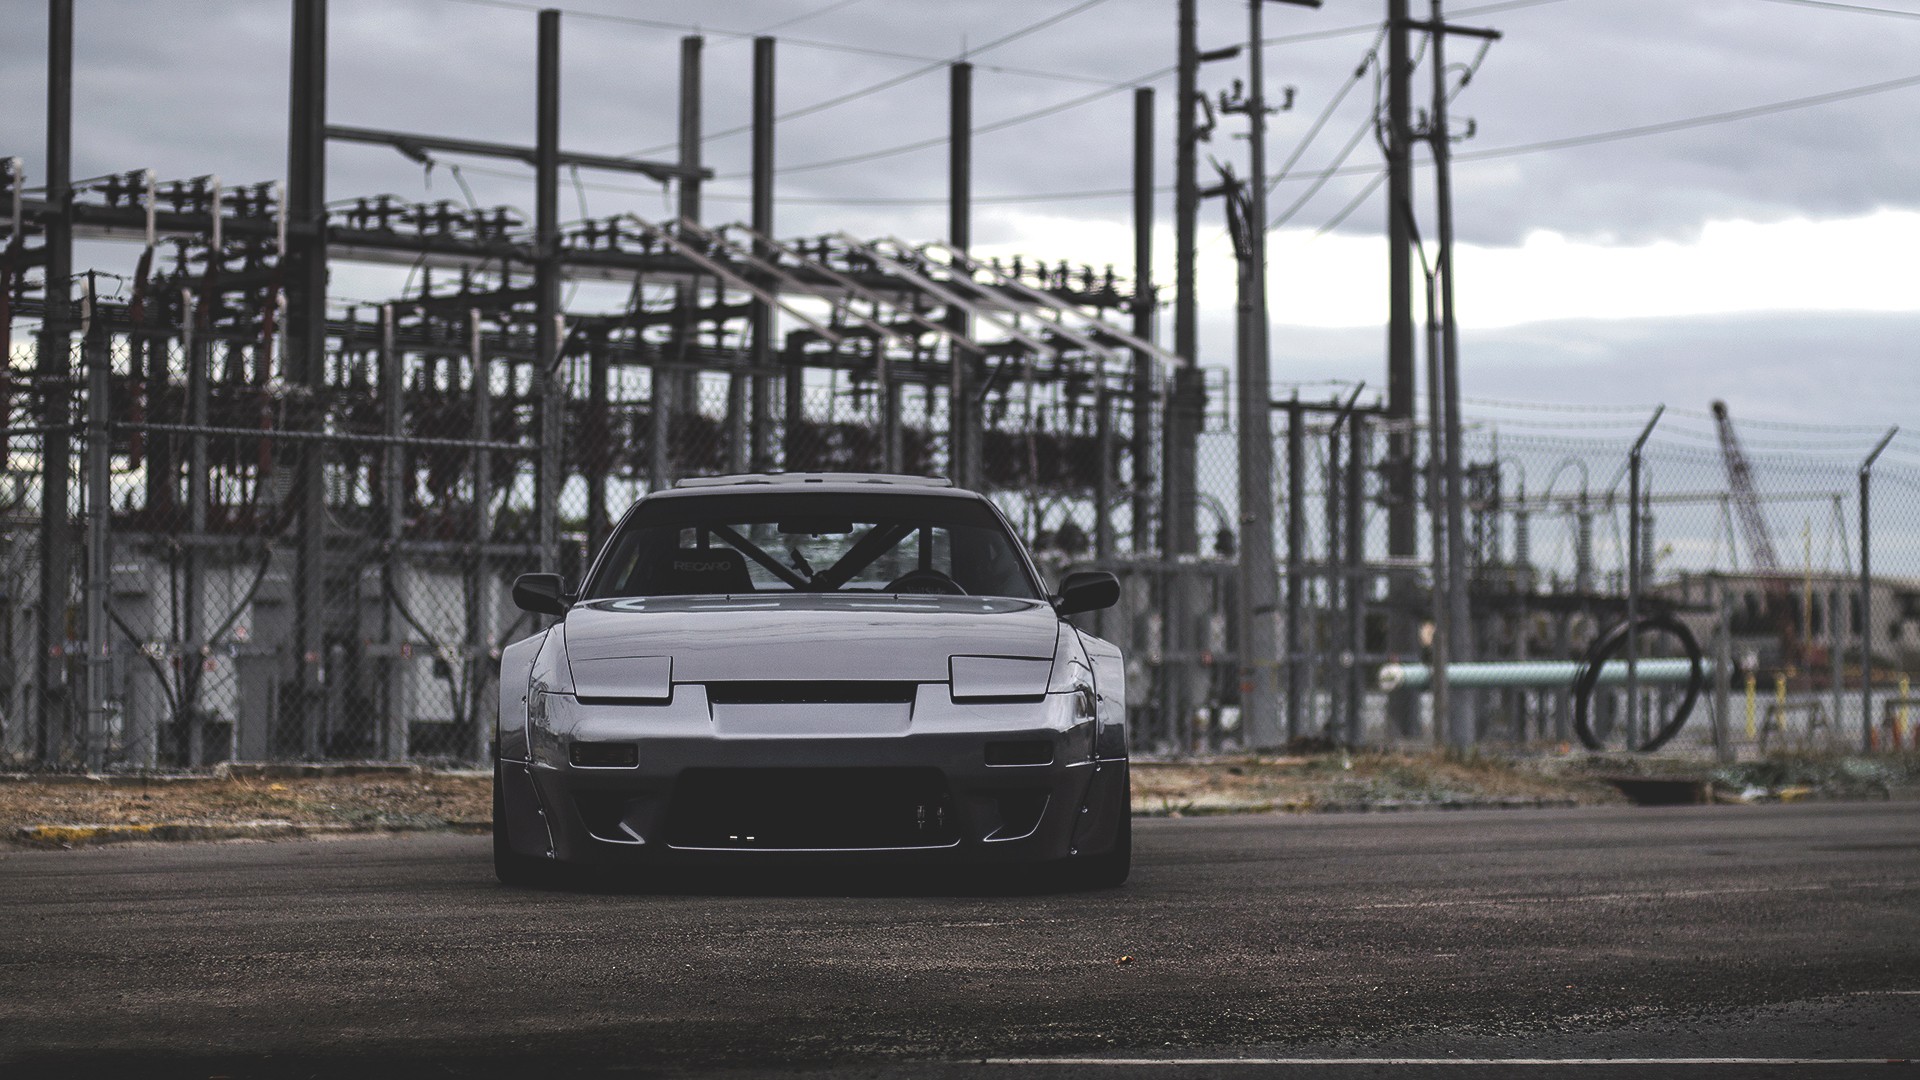 General 1920x1080 car Nissan 240SX Nissan pop-up headlights bolt-on fender flares gray cars Japanese cars vehicle frontal view overcast sky clouds